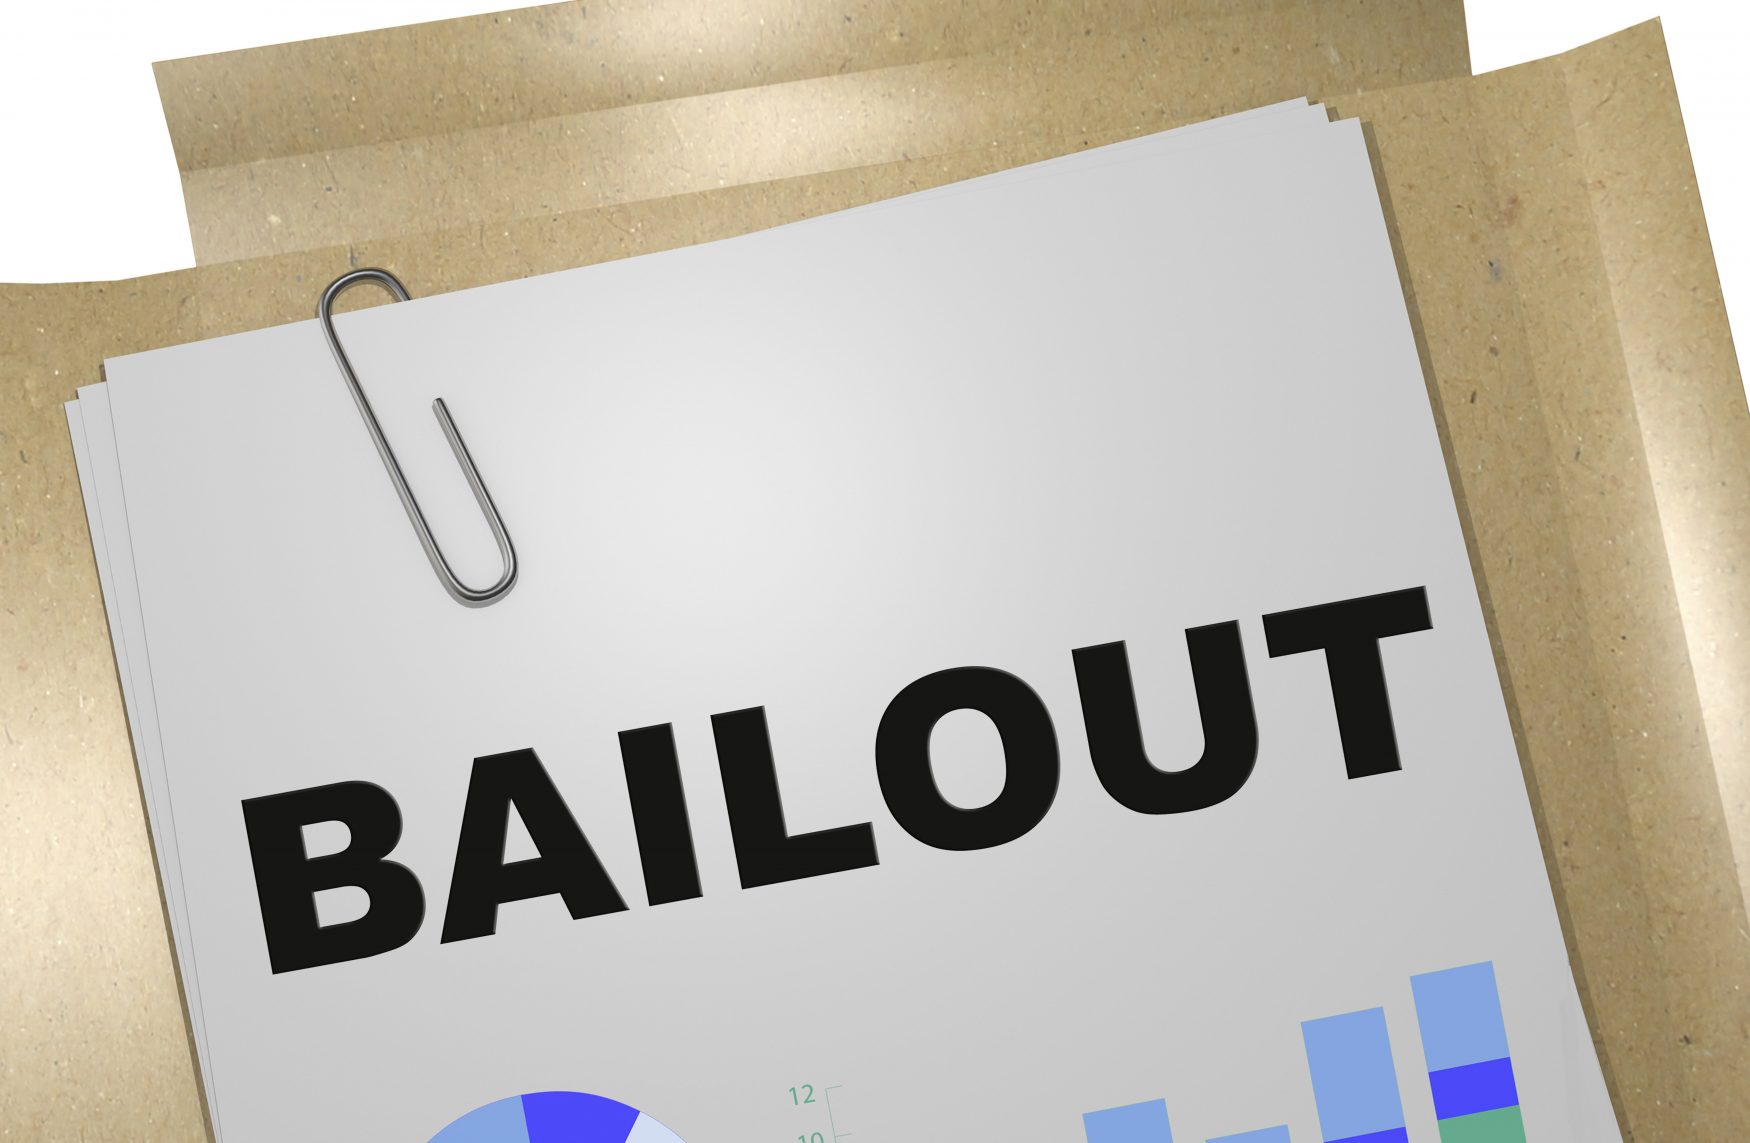 The 700 Billion Bailout Bill Revealed